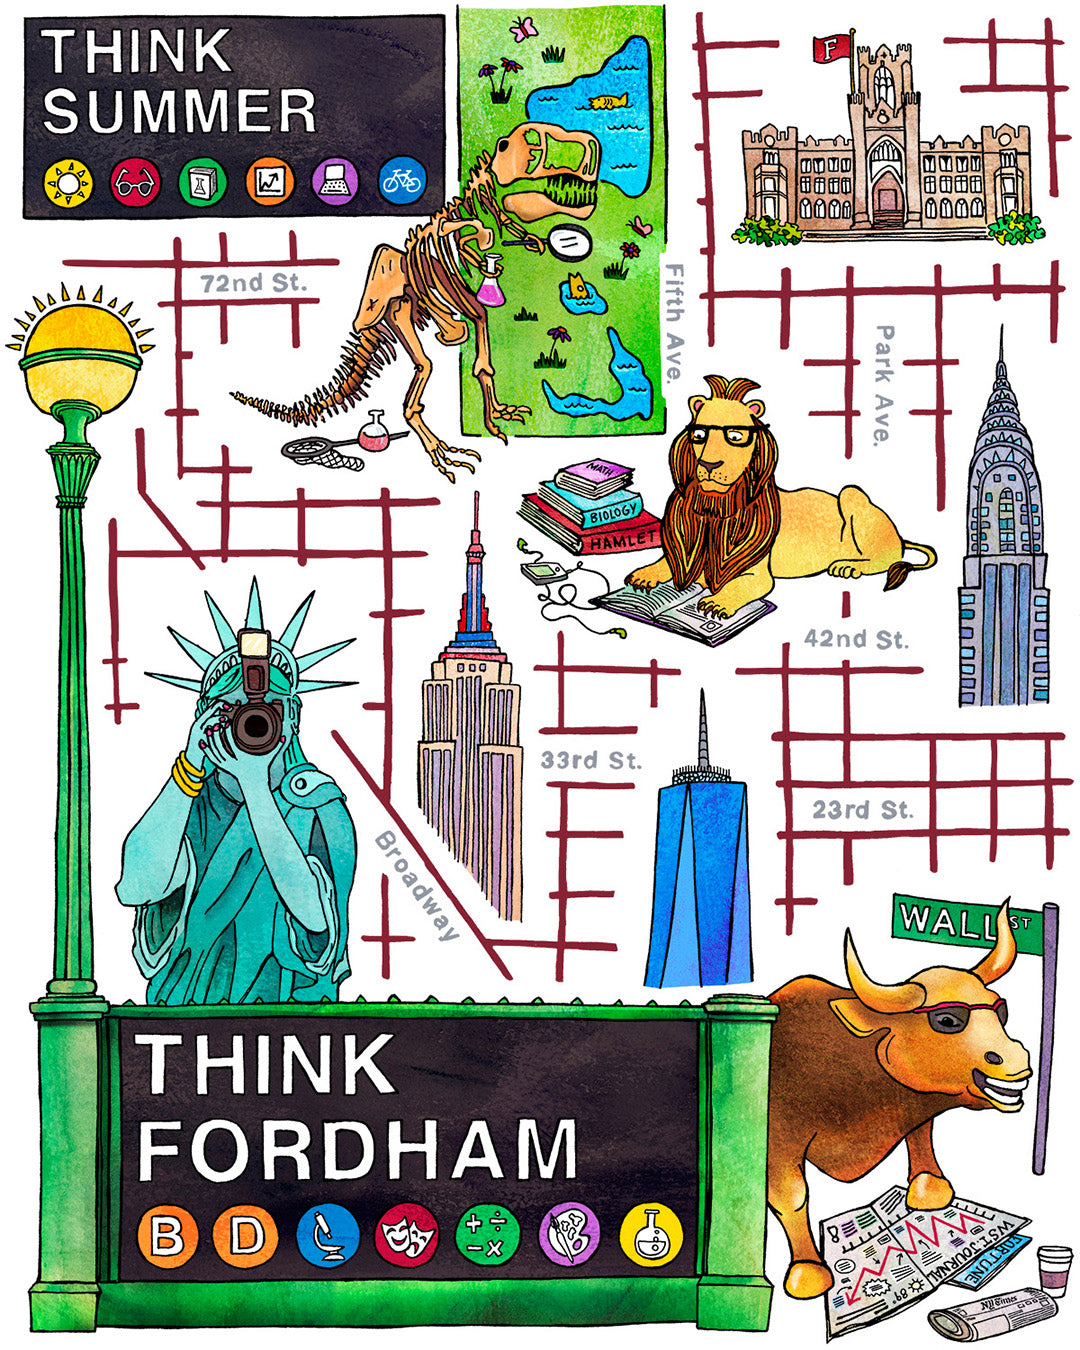 Illustrated map of New York City for Fordham University's Summer Program. Image combines academic subjects with NYC landmarks. Statue of Liberty taking photos behind green subway sign lamp post labeled "Think Fordham". Subway sign above "Think Summer"